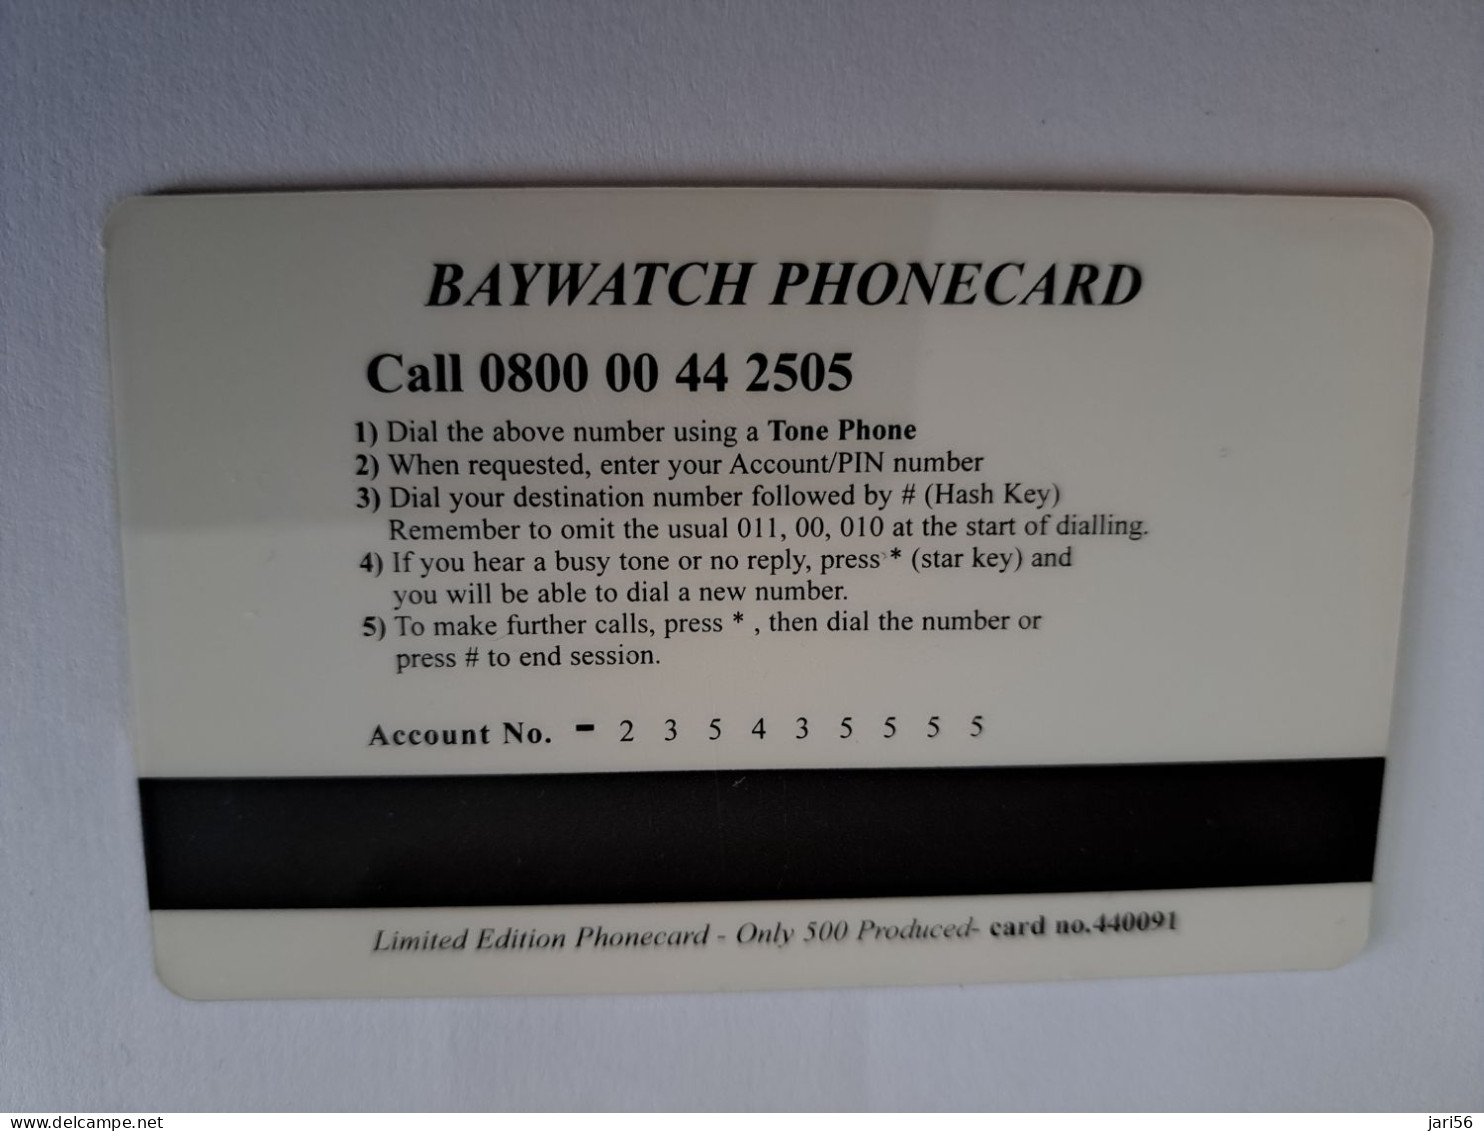 GREAT BRITAIN / 10 POUND /MAGSTRIPE  / BAYWATCH PHONECARD/ LIMITED EDITION/ ONLY 500 EX     **15682** - [10] Collections